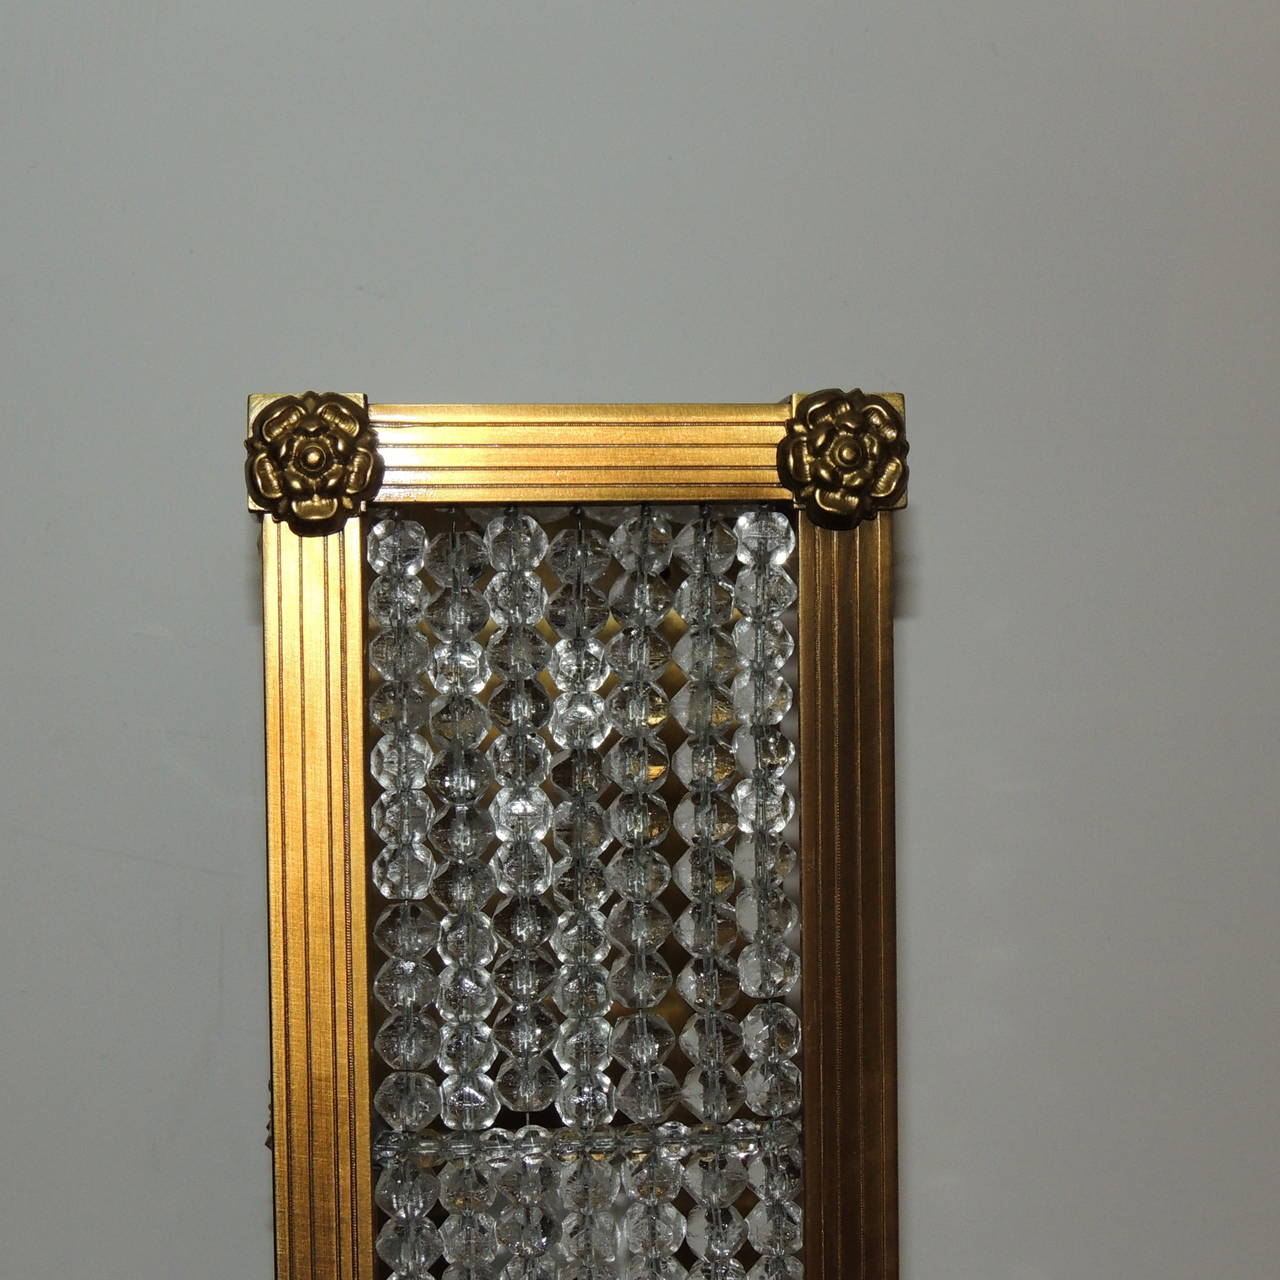 Beaded Beautiful Vintage Bronze Sherle Wagner Light Box Fixture with Crystal Beads